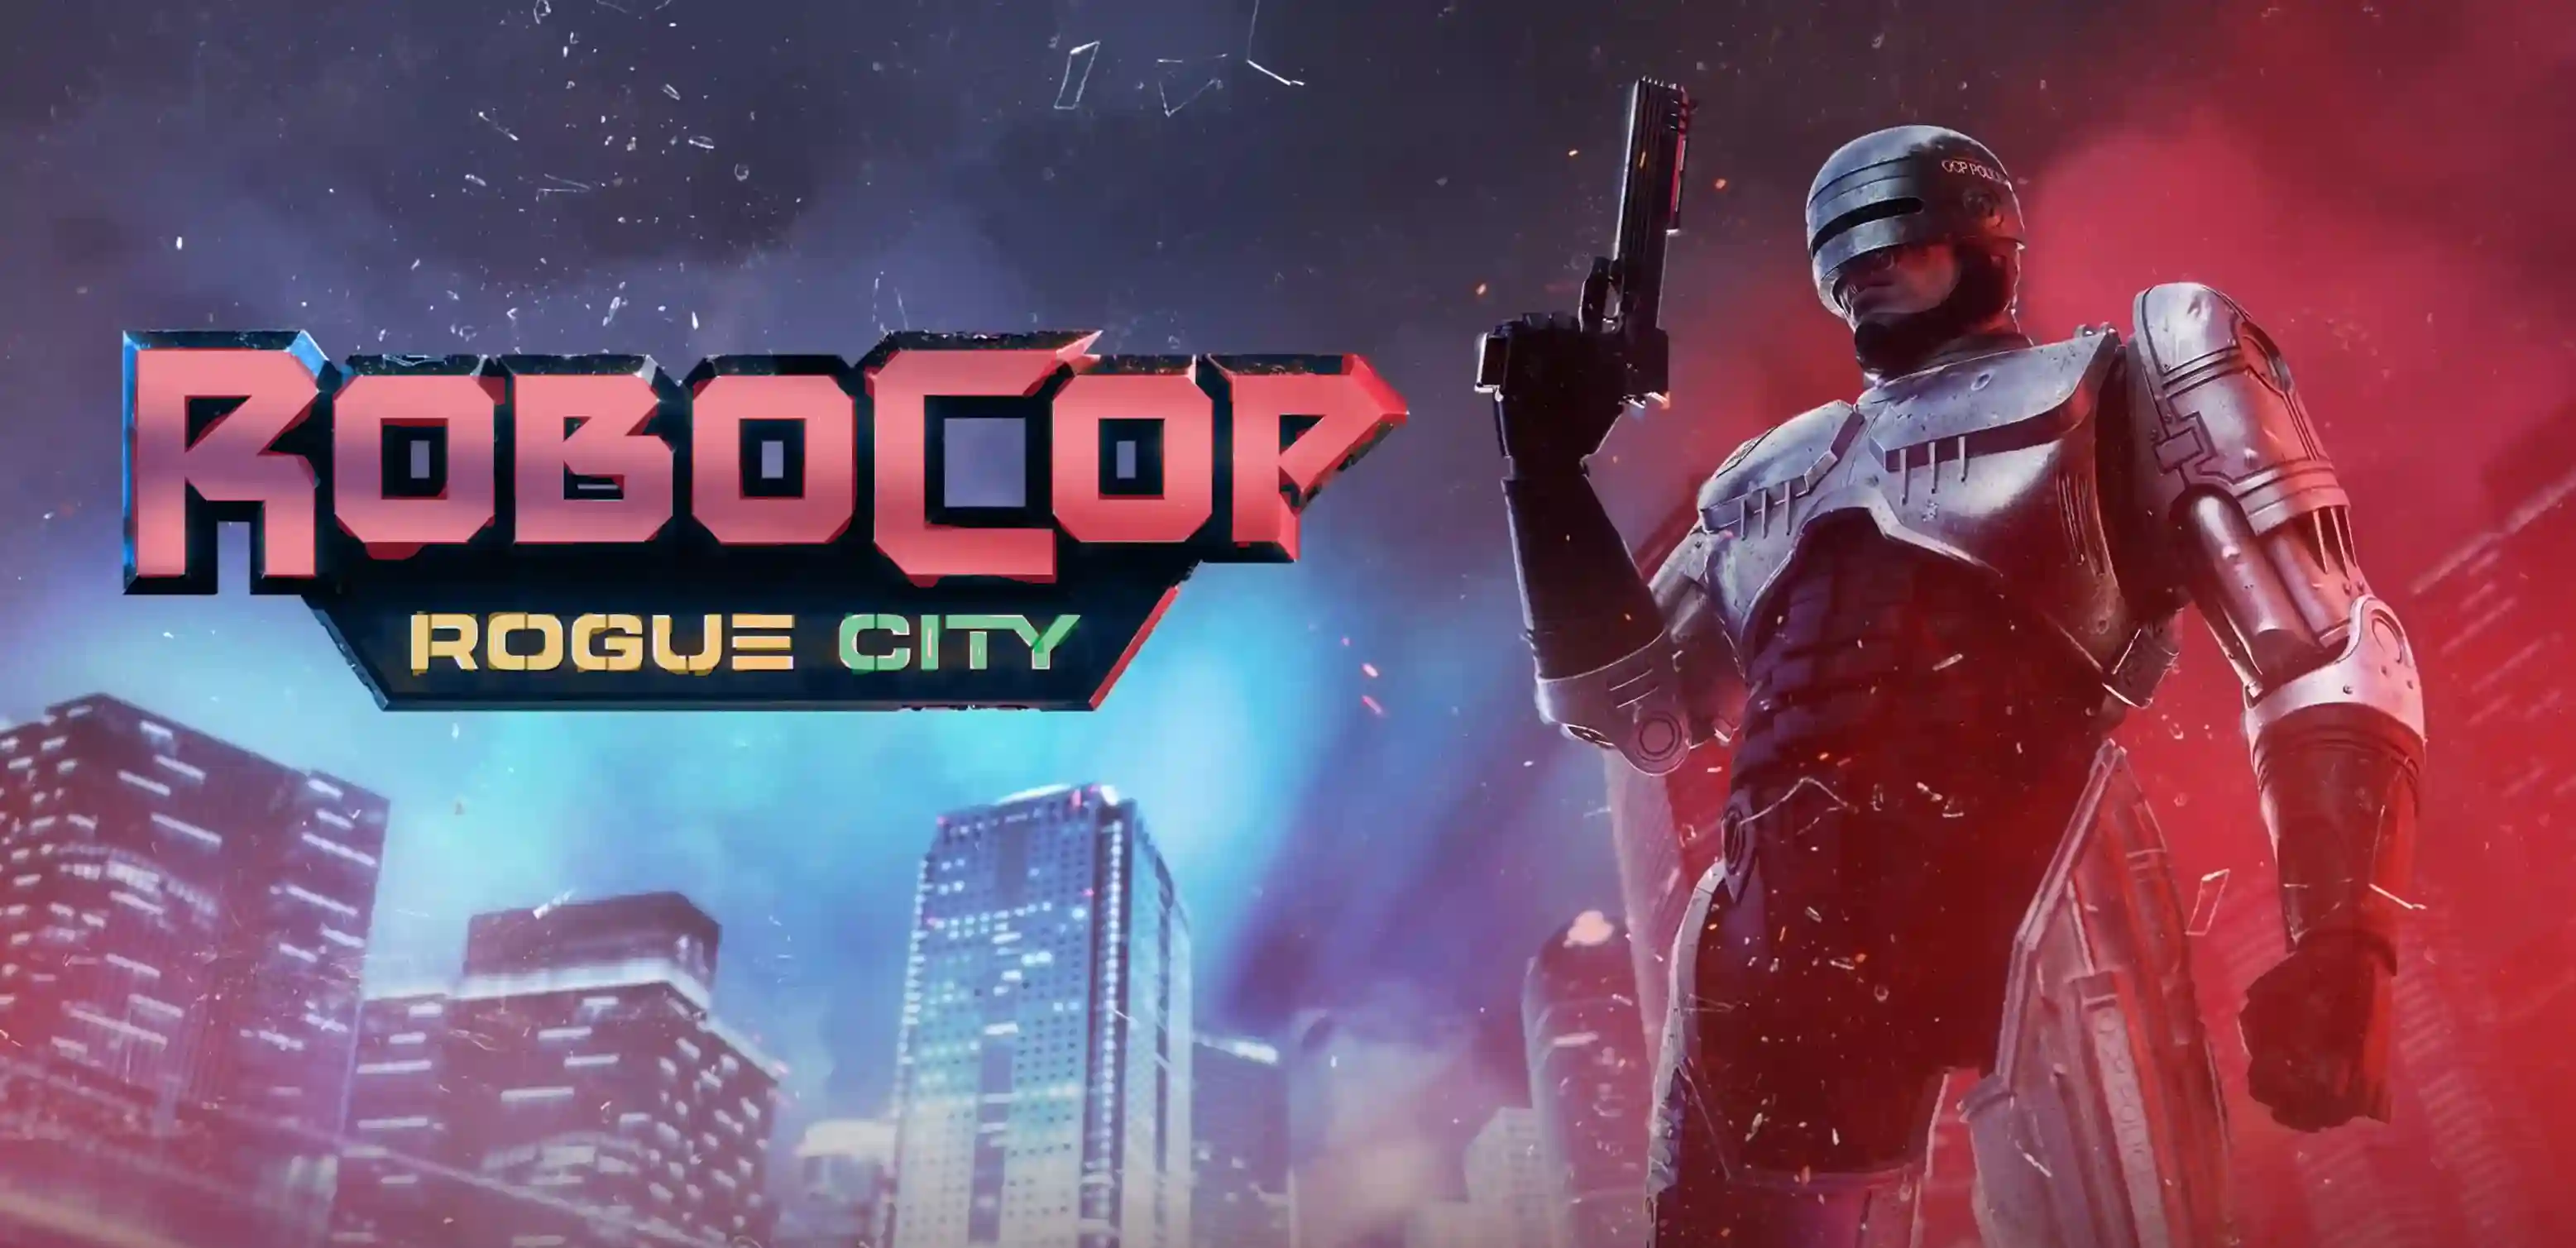 You Have 20 Seconds to Watch This RoboCop: Rogue City PS5 Gameplay